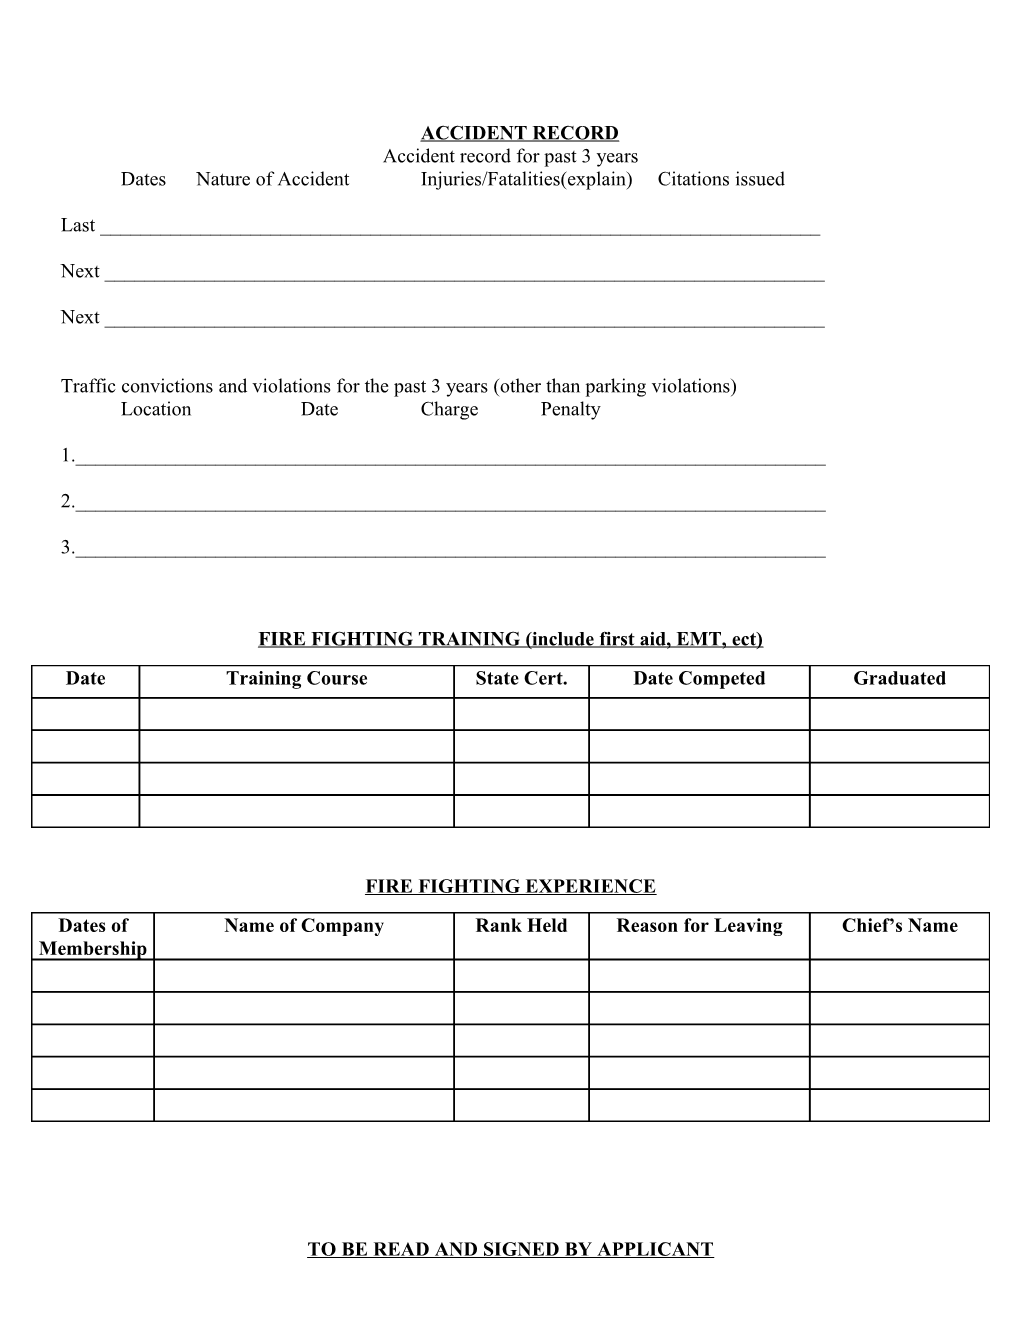 Date Application Submitted